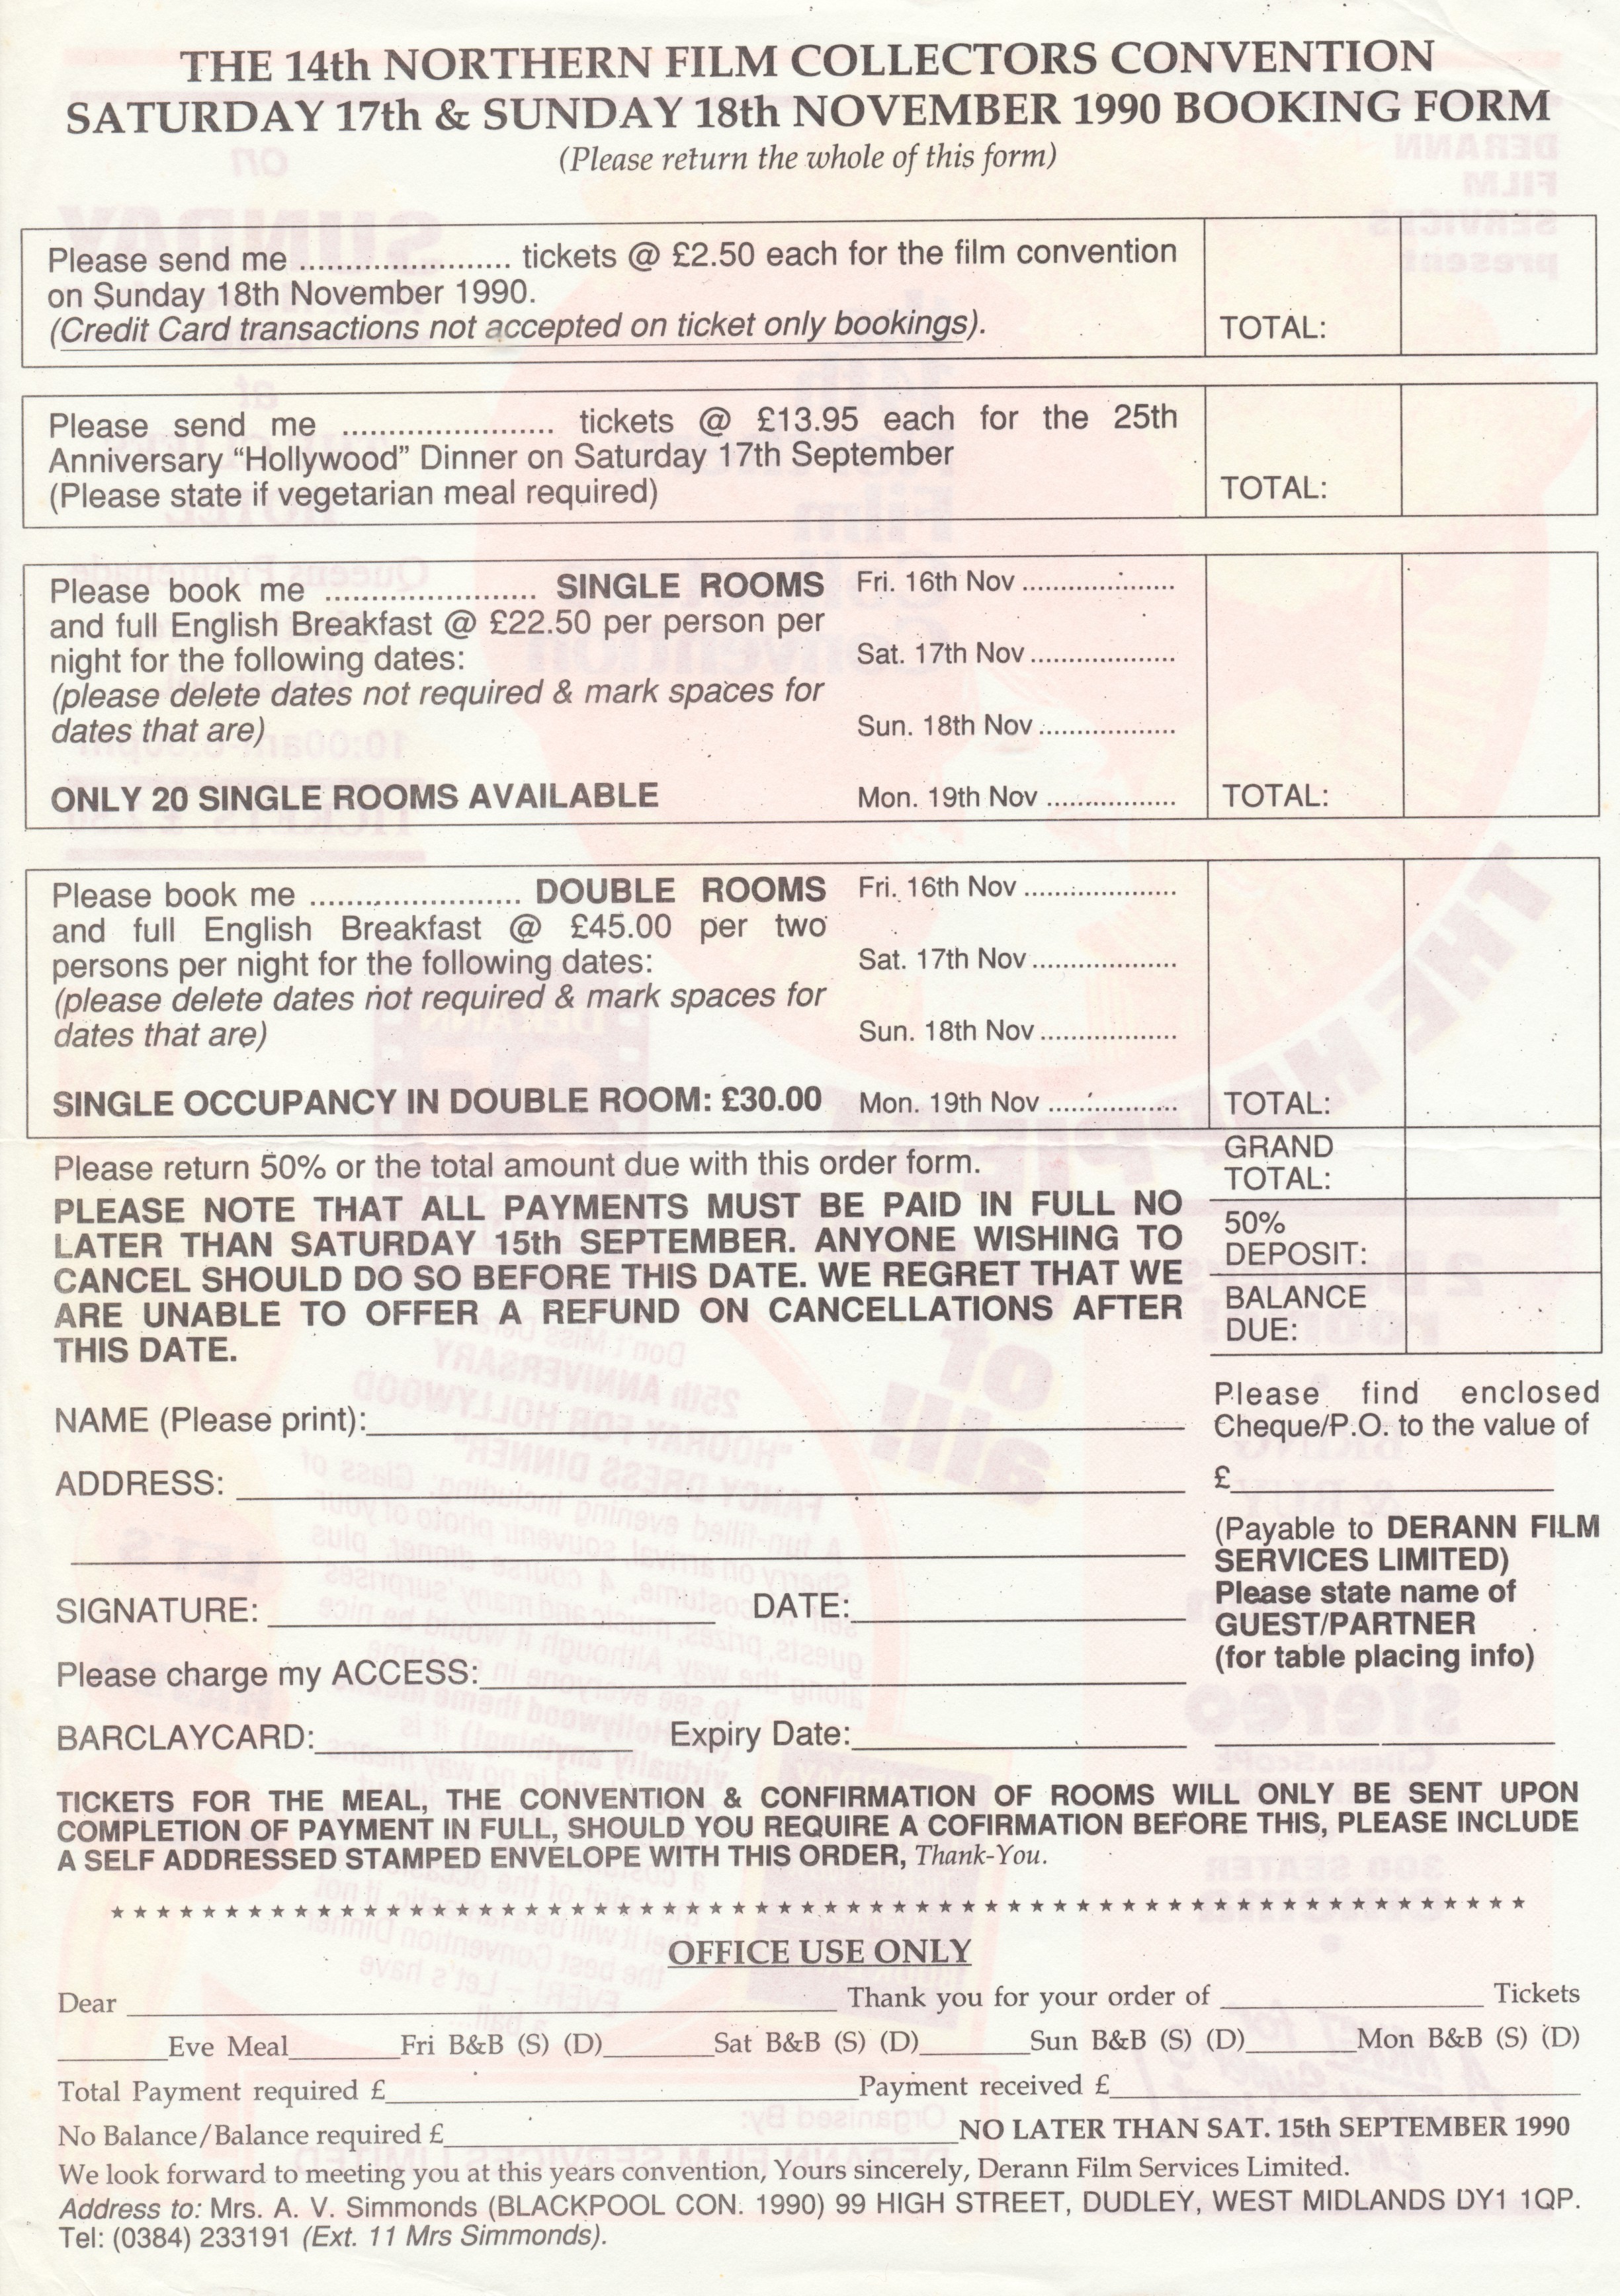 1990 Convention Booking Form, page 2